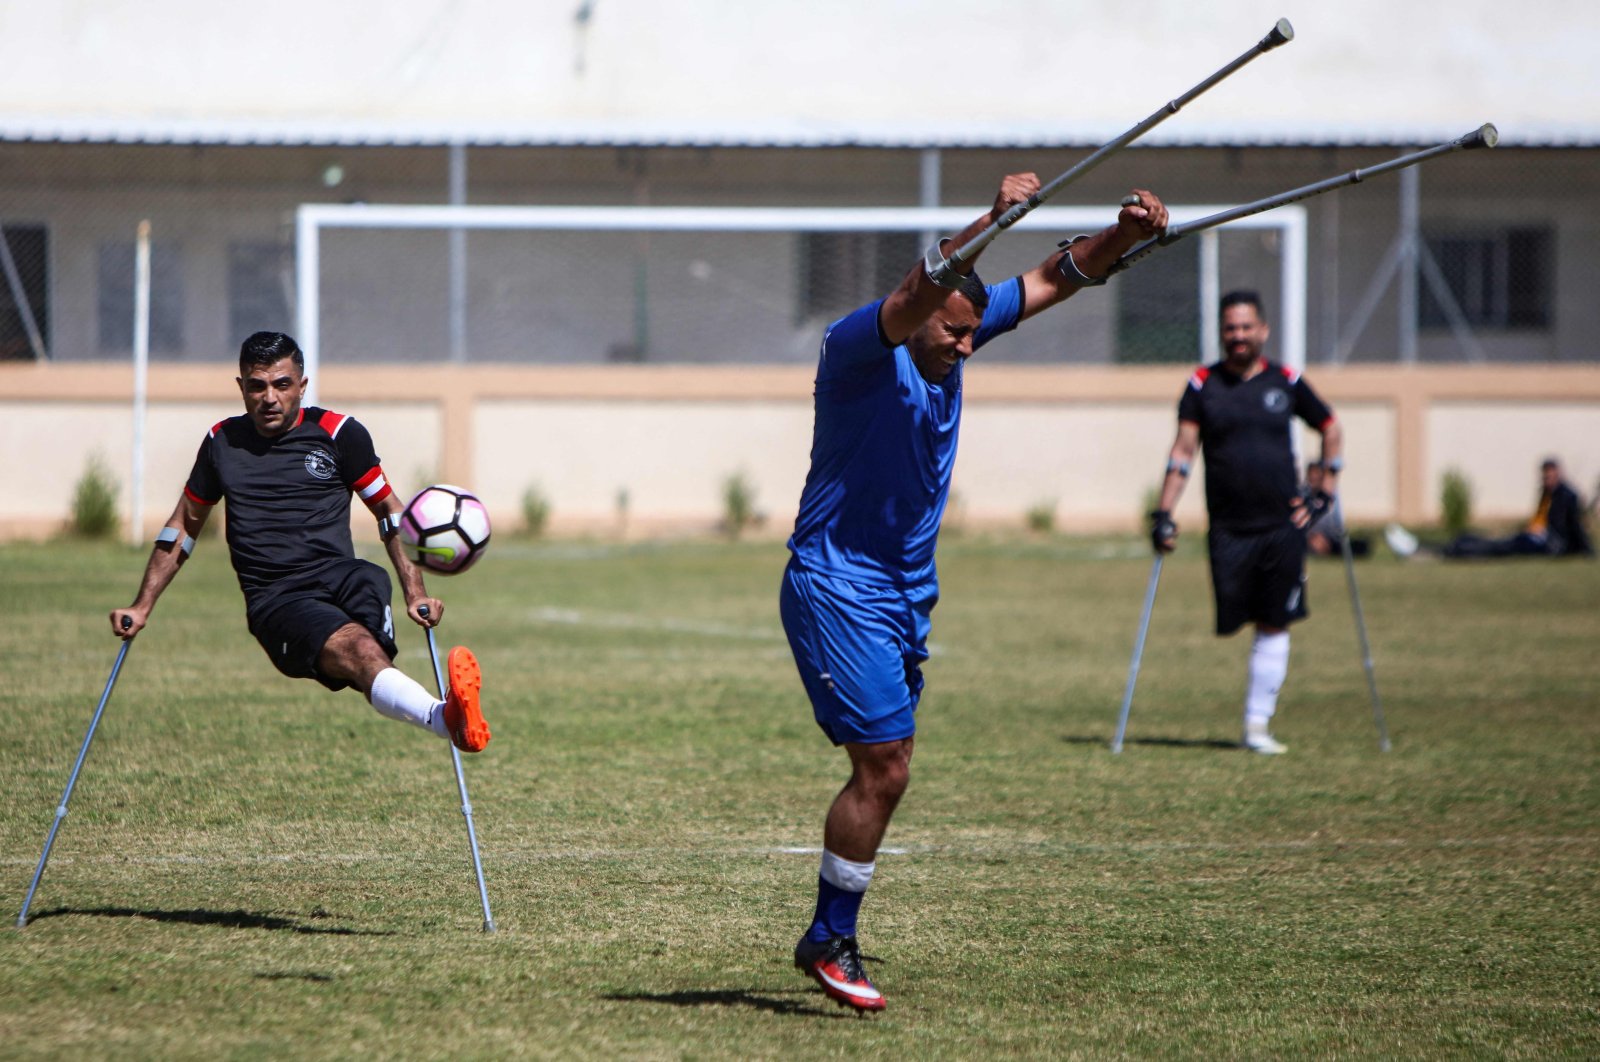 Palestinian players compete during the final of a local football championship for amputees between Al-Jazeera and Al-Abtal, organized by the International Committee of the Red Cross (ICRC), in Gaza City on March 18, 2021. (AFP Photo)